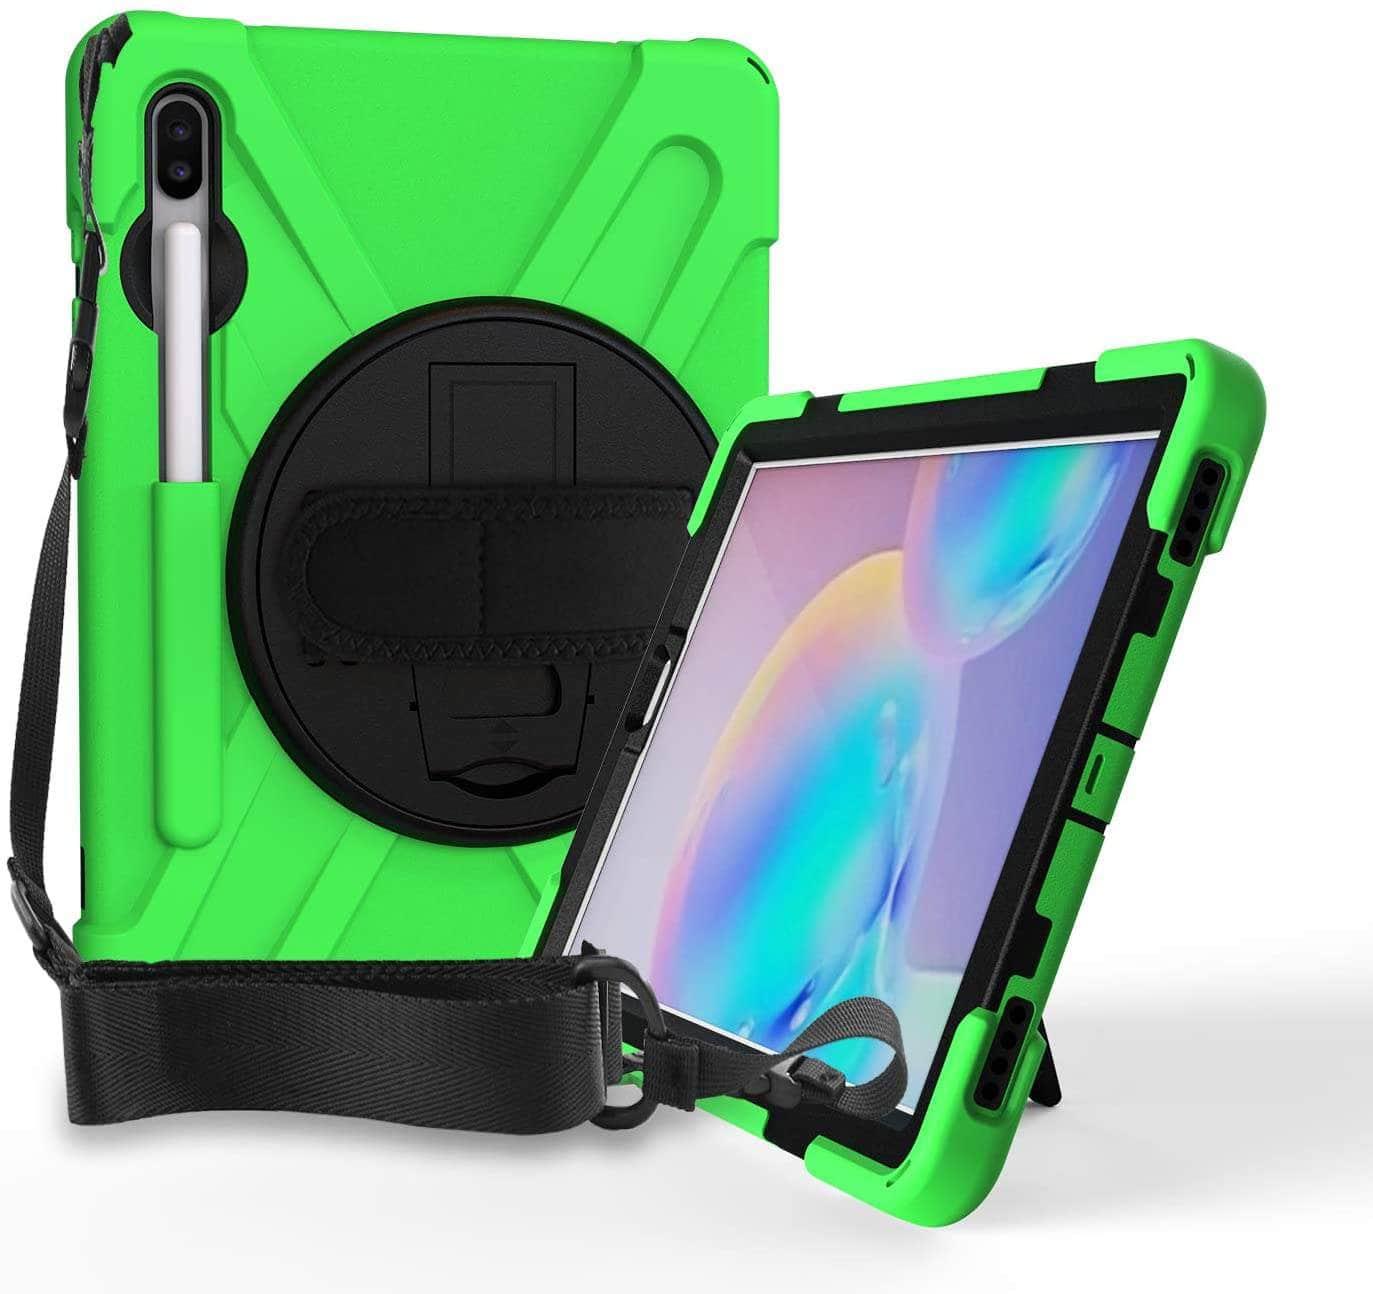 Casebuddy Green / S9 11 inch Galaxy Tab S9 Shockproof Kids Tablet Stand